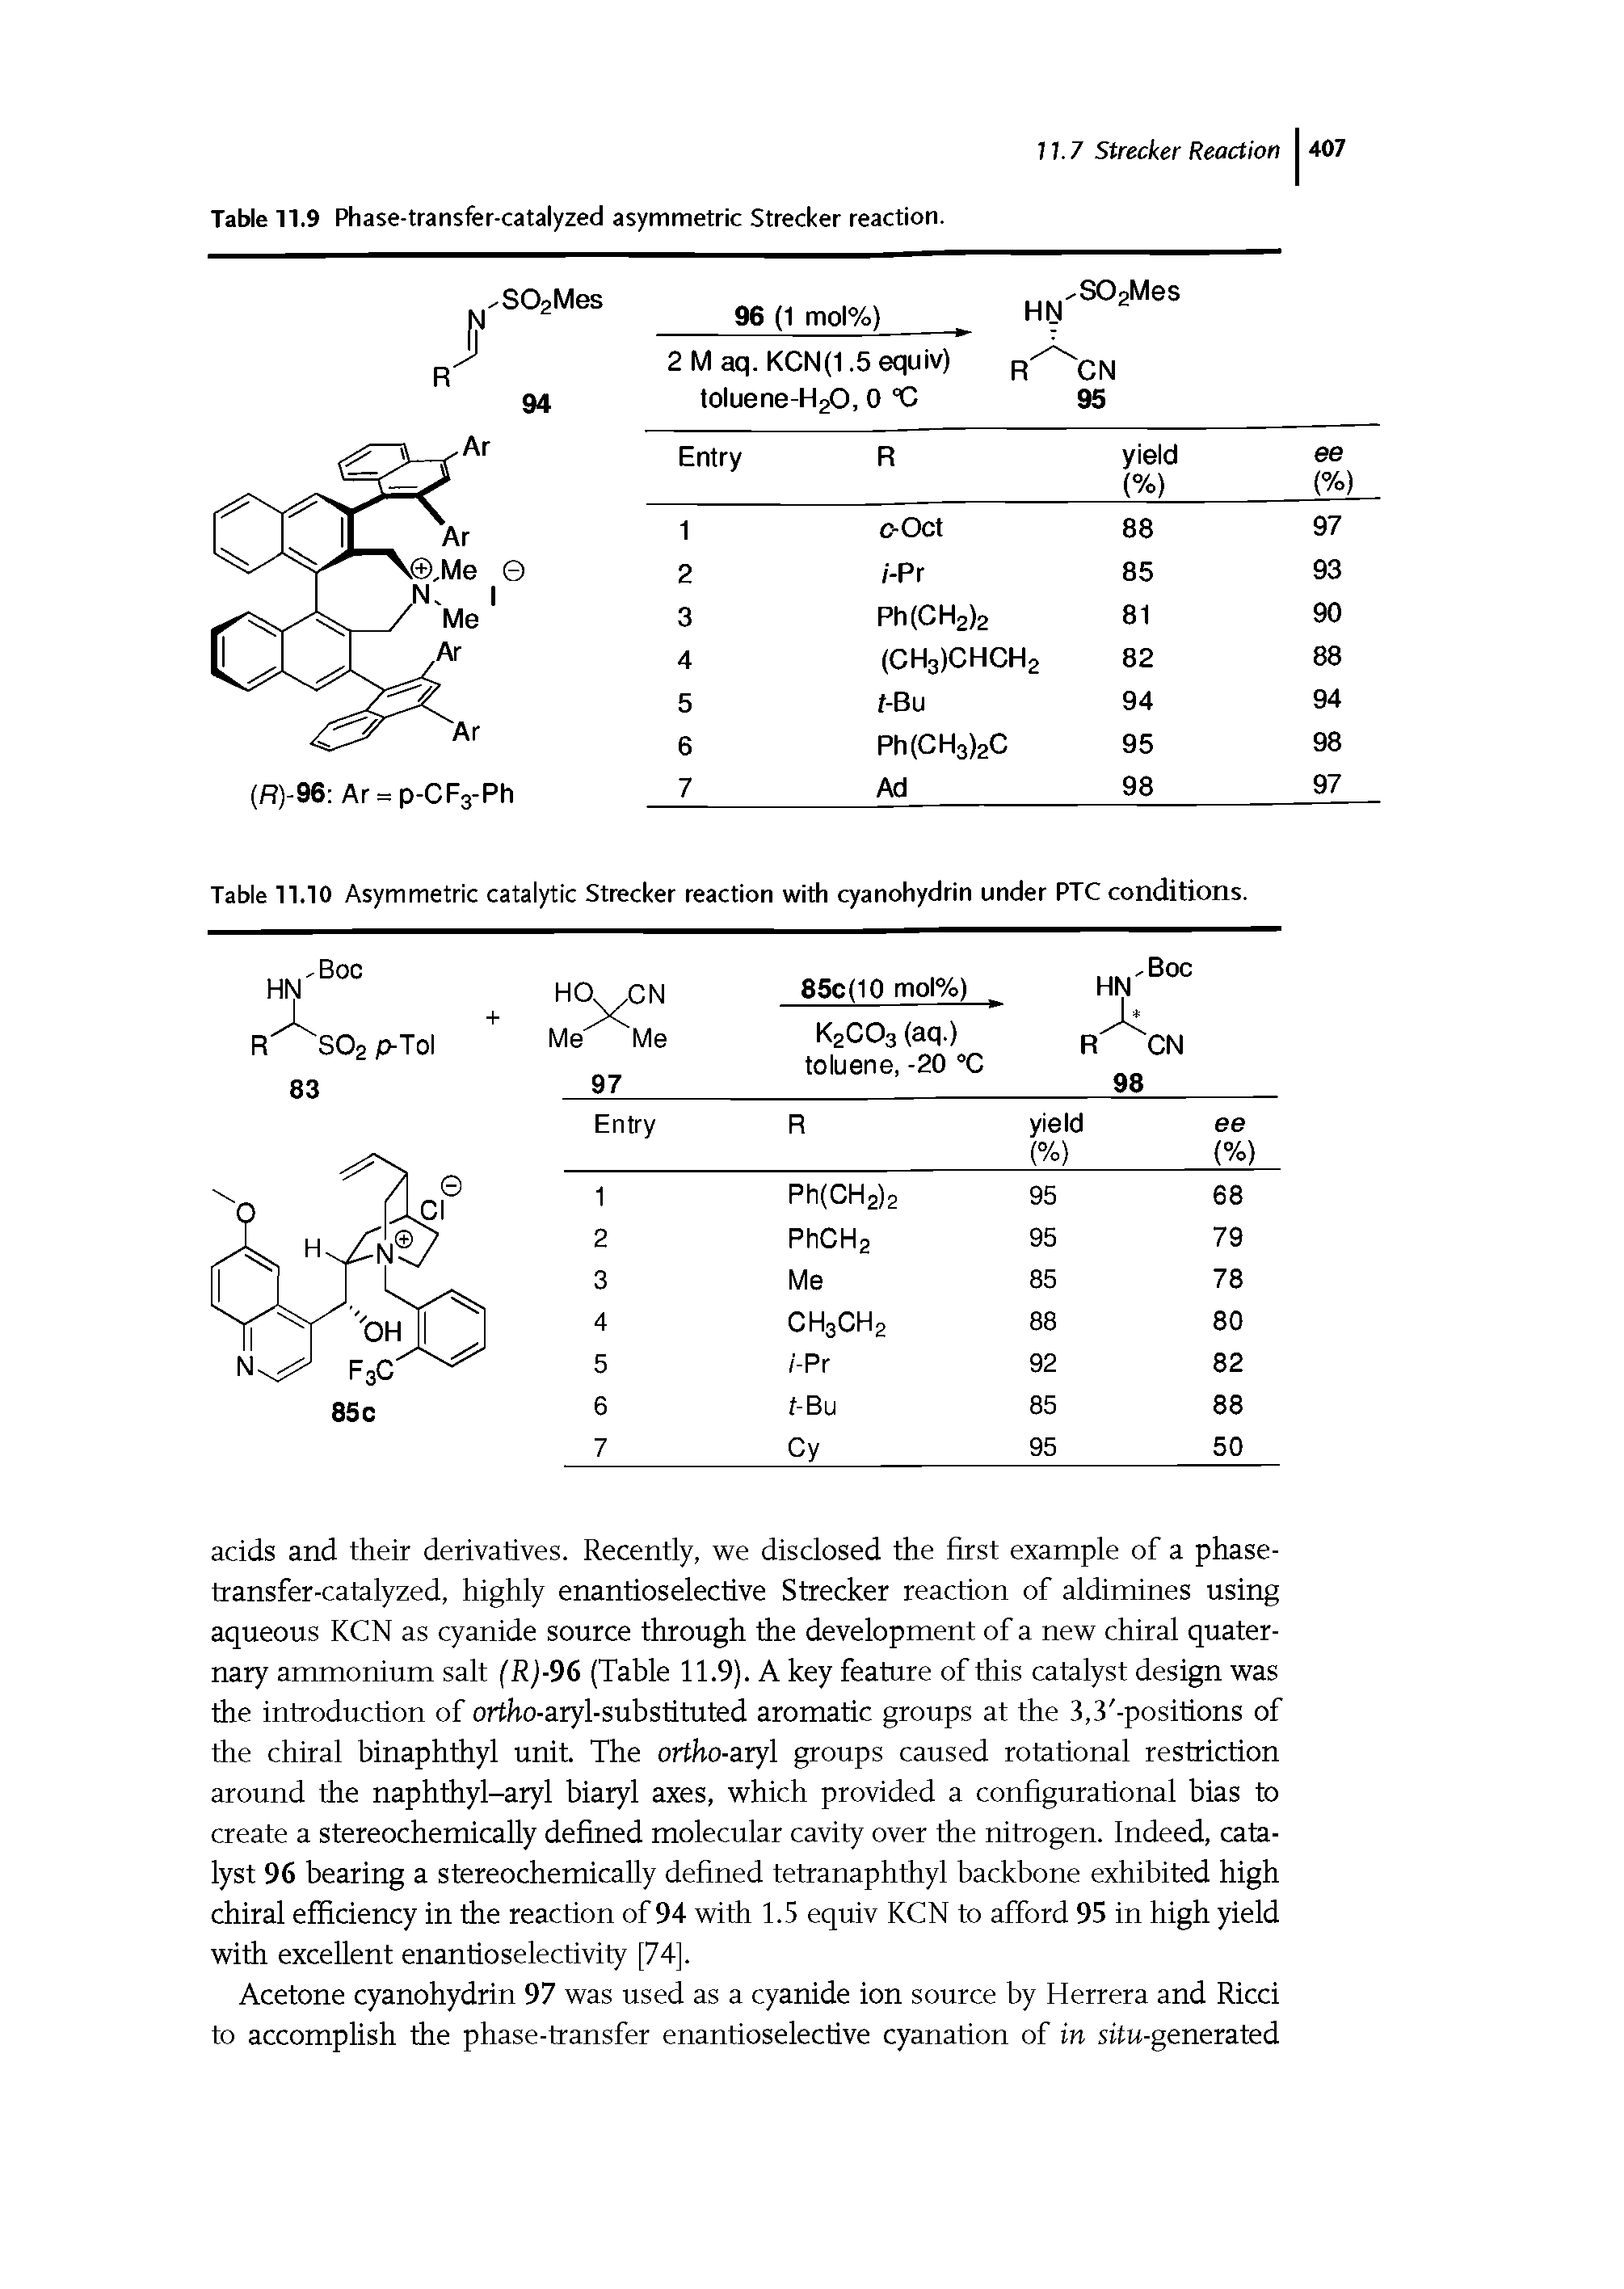 Table 11.10 Asymmetric catalytic Strecker reaction with cyanohydrin under PTC conditions.